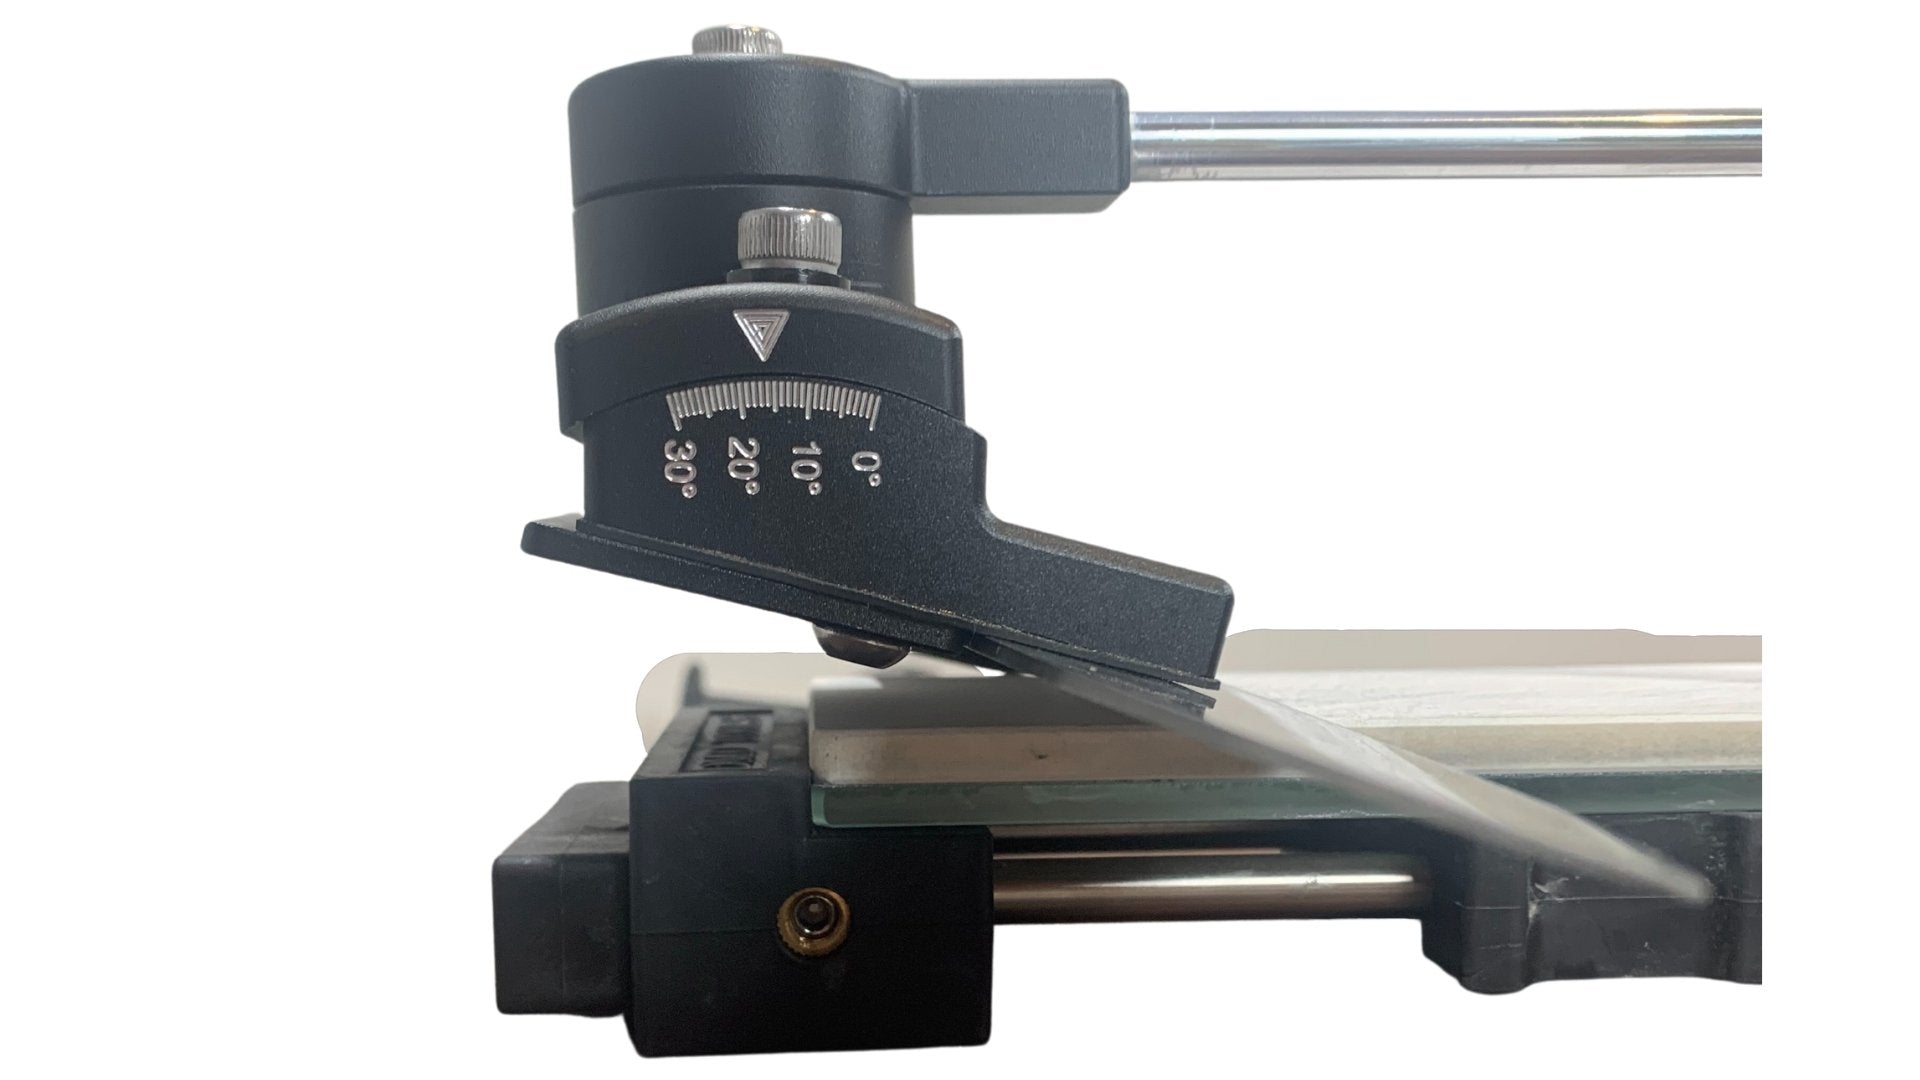 2023 Sharpener of the Year? SharpWorx Professional Knife to Stone